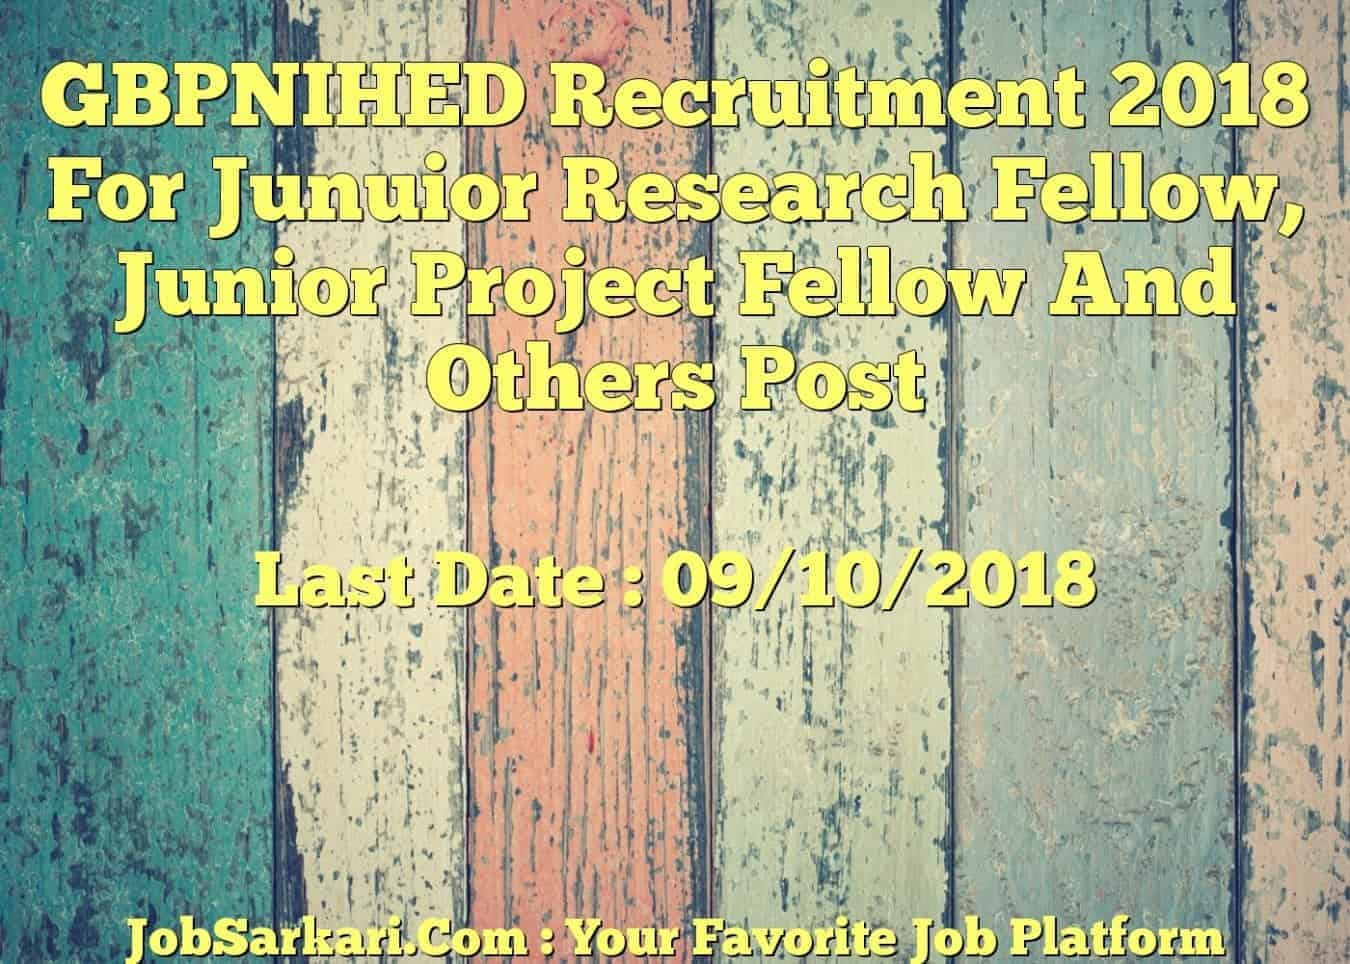 GBPNIHED Recruitment 2018 For Junuior Research Fellow, Junior Project Fellow And Others Post